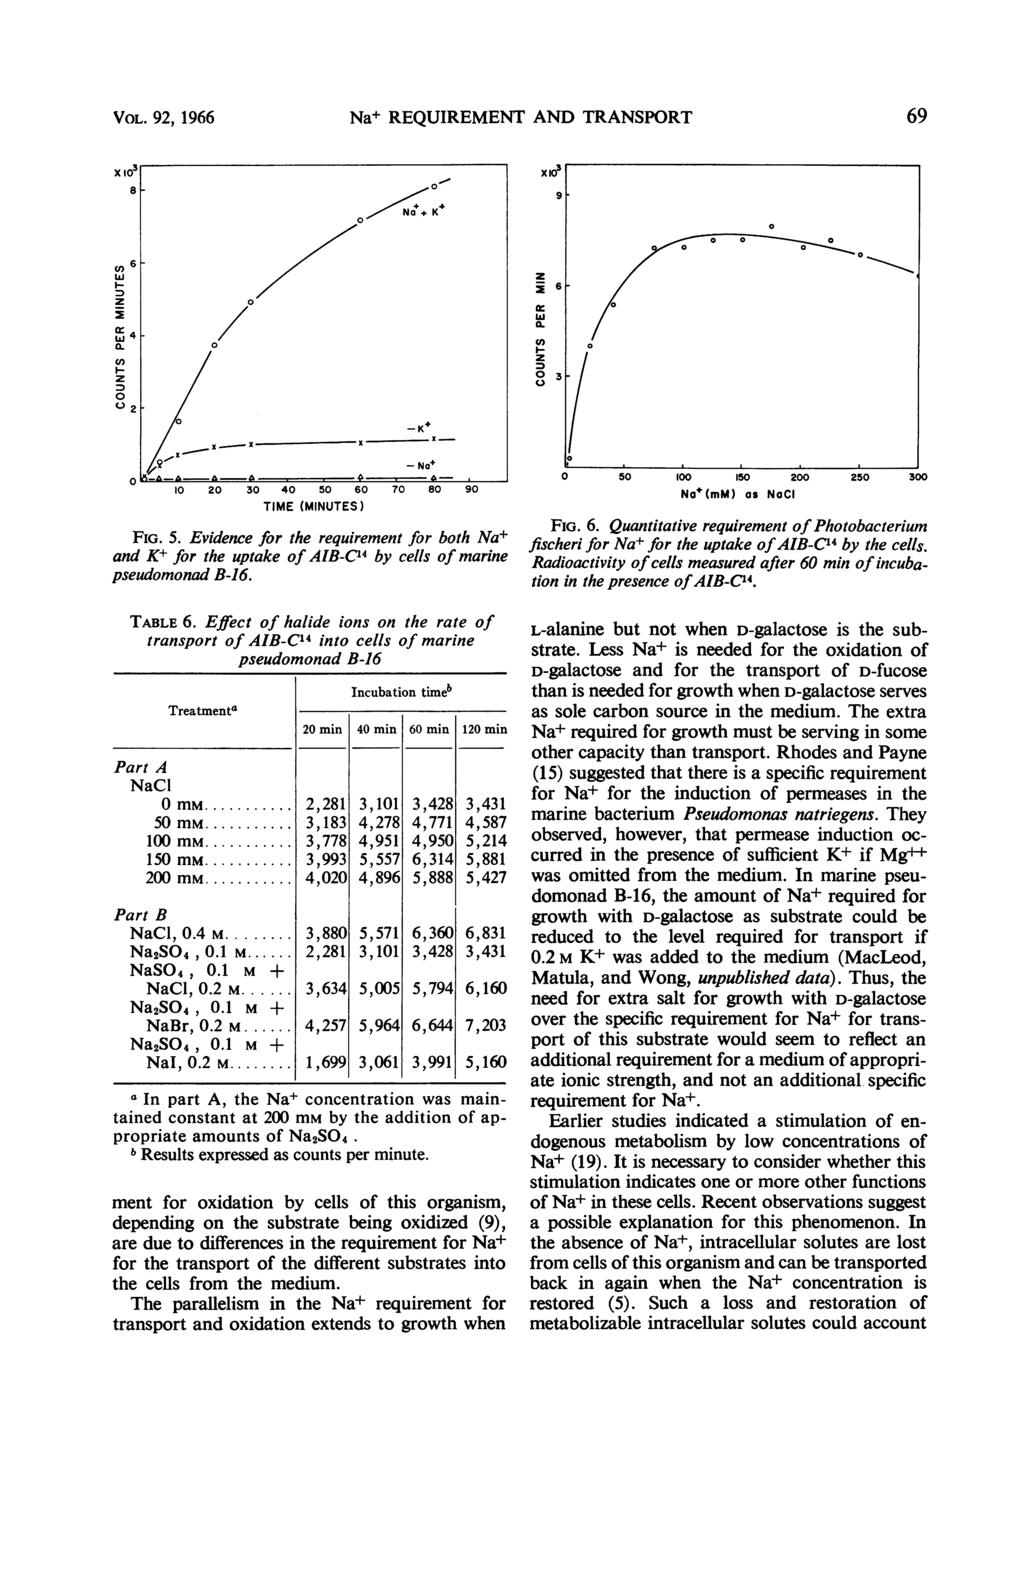 VOL. 92, 1966 Na+ REQUIREMENT AND TRANSPORT 69 TIME (MINUTES) FIG. 5. Evidence for the requirement for both Na+ and K+ for the uptake of AIB-C'4 by cells of marine pseudomonad B-16. TABLE 6.